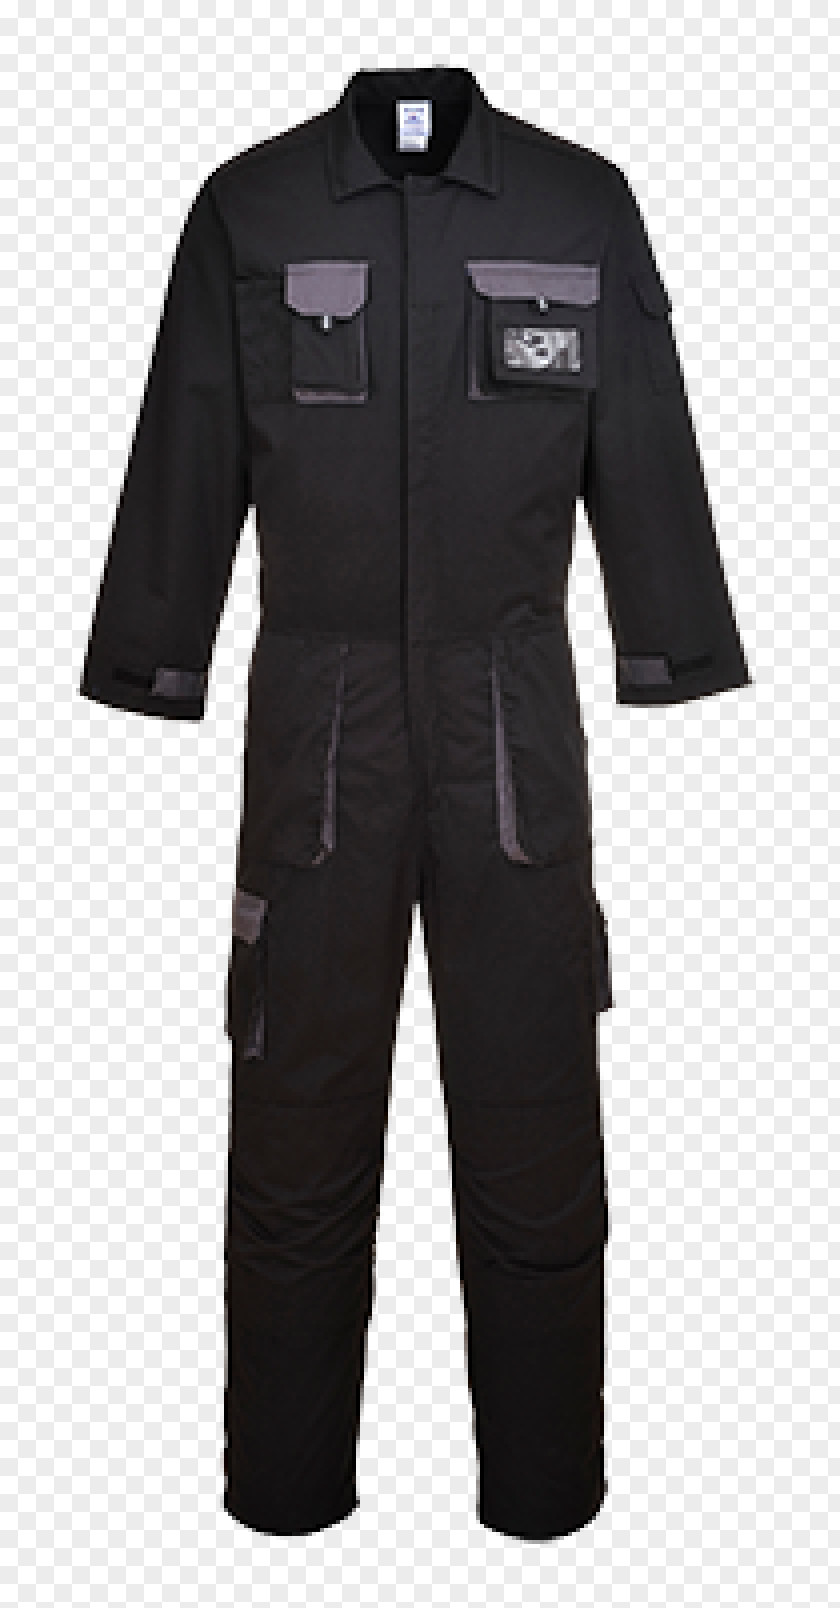 Suit Workwear Boilersuit Overall Clothing Portwest PNG